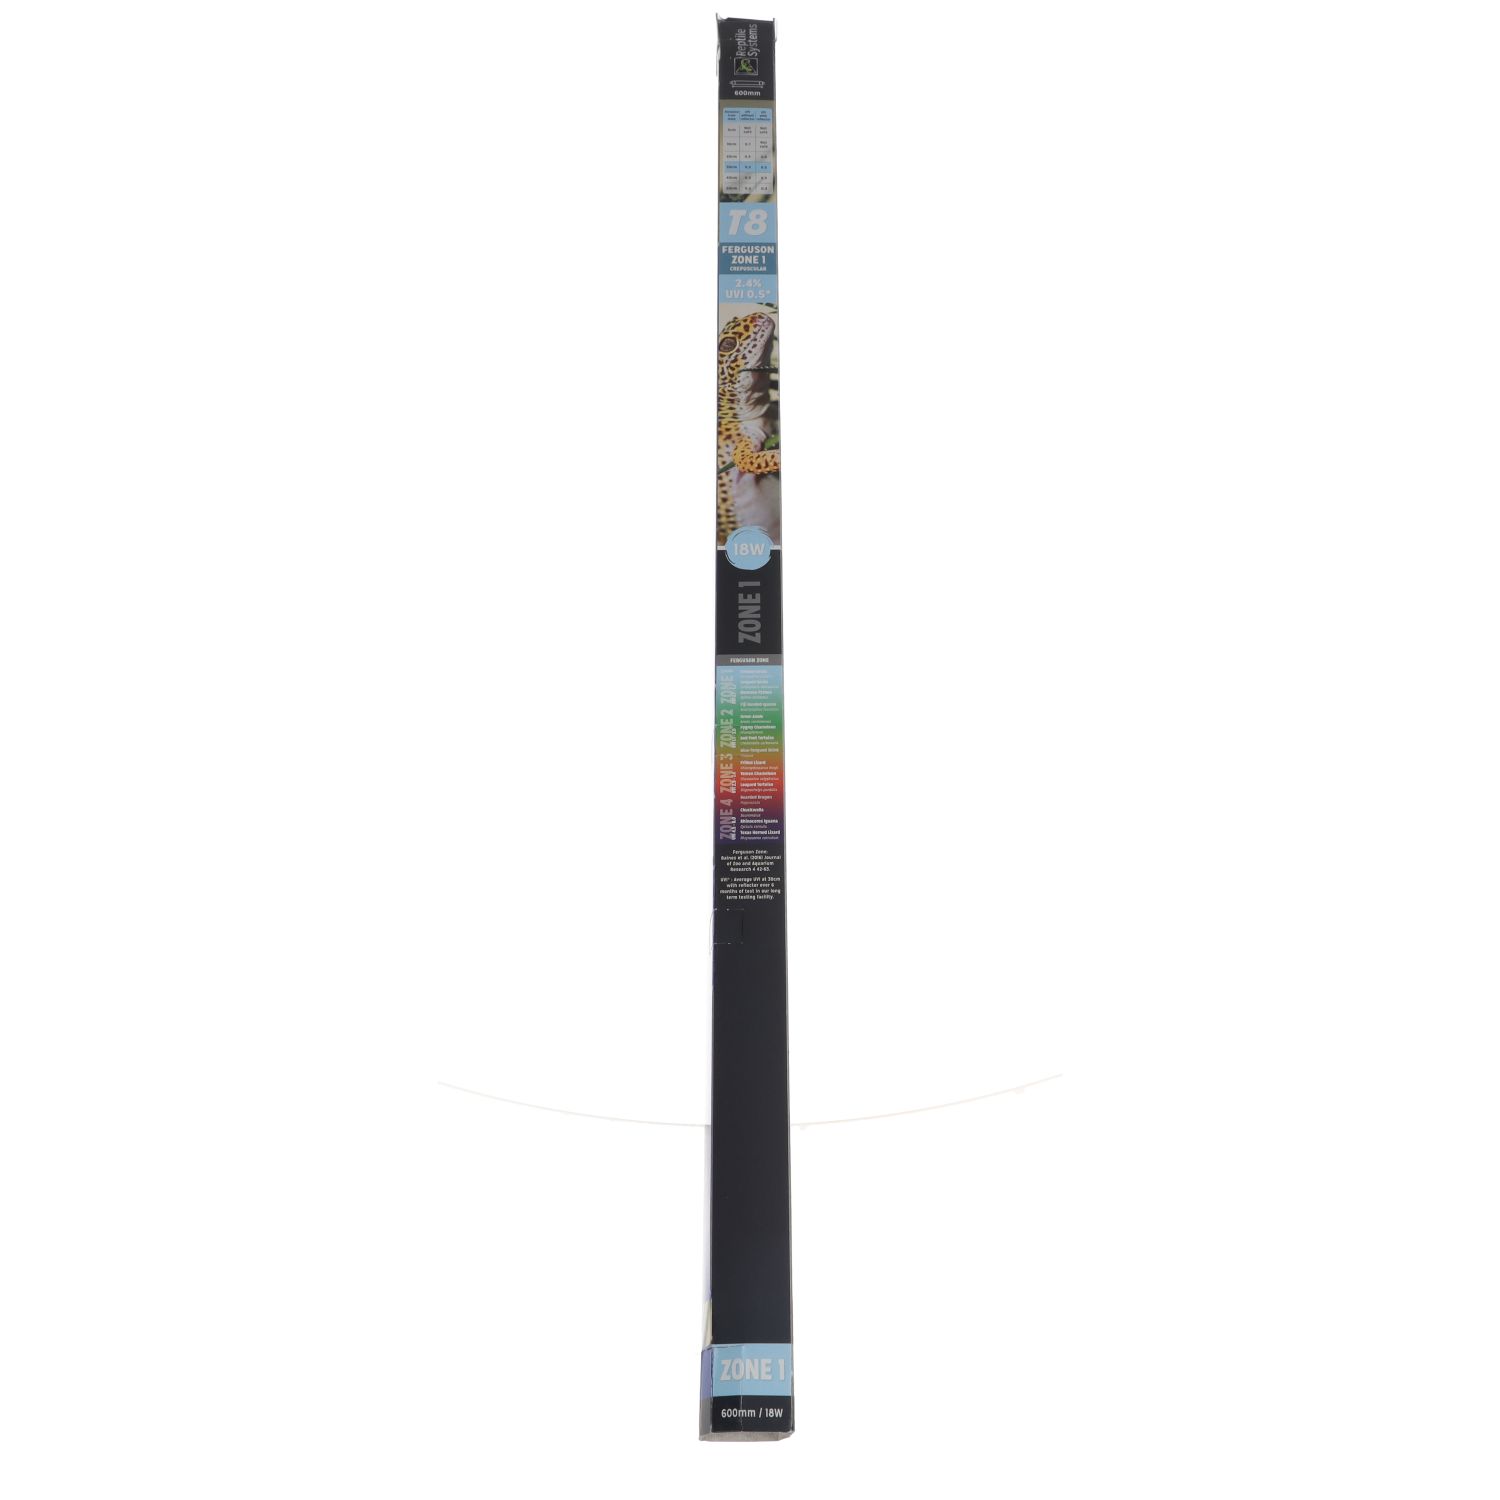 RS Zone 1 T8 600mm - 18W